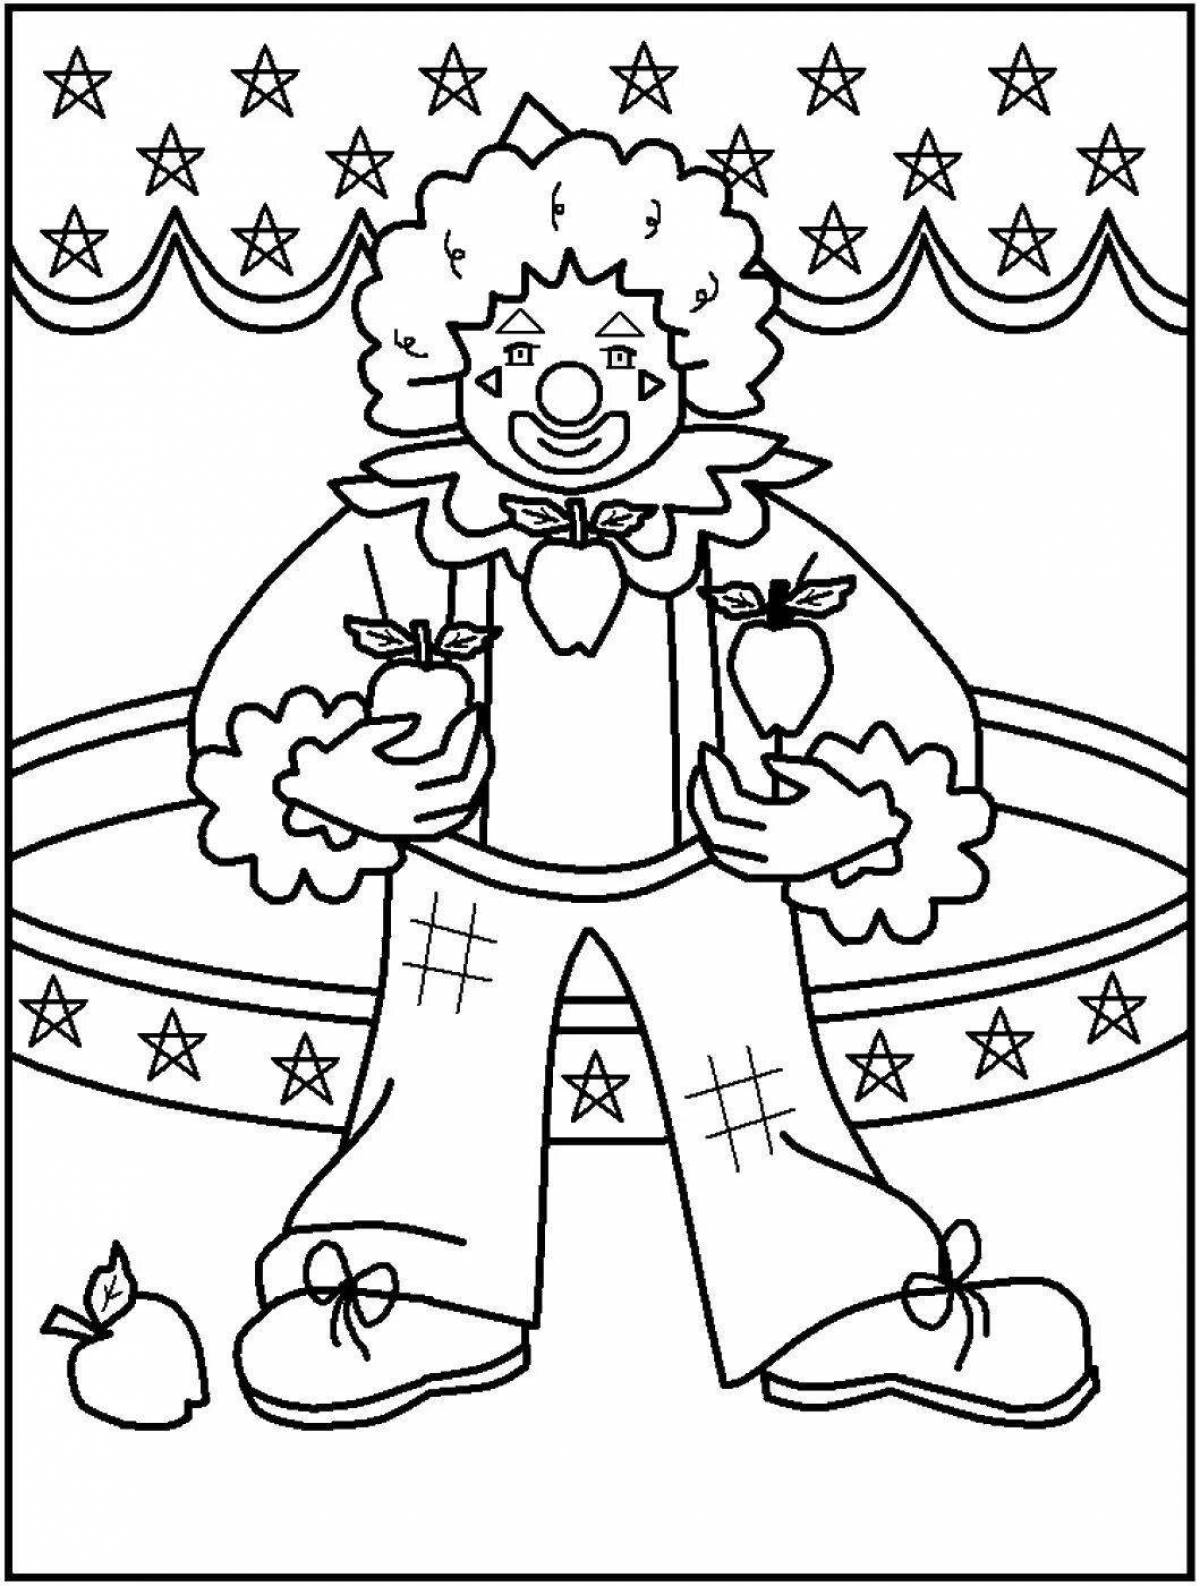 Exciting coloring book visiting a clown